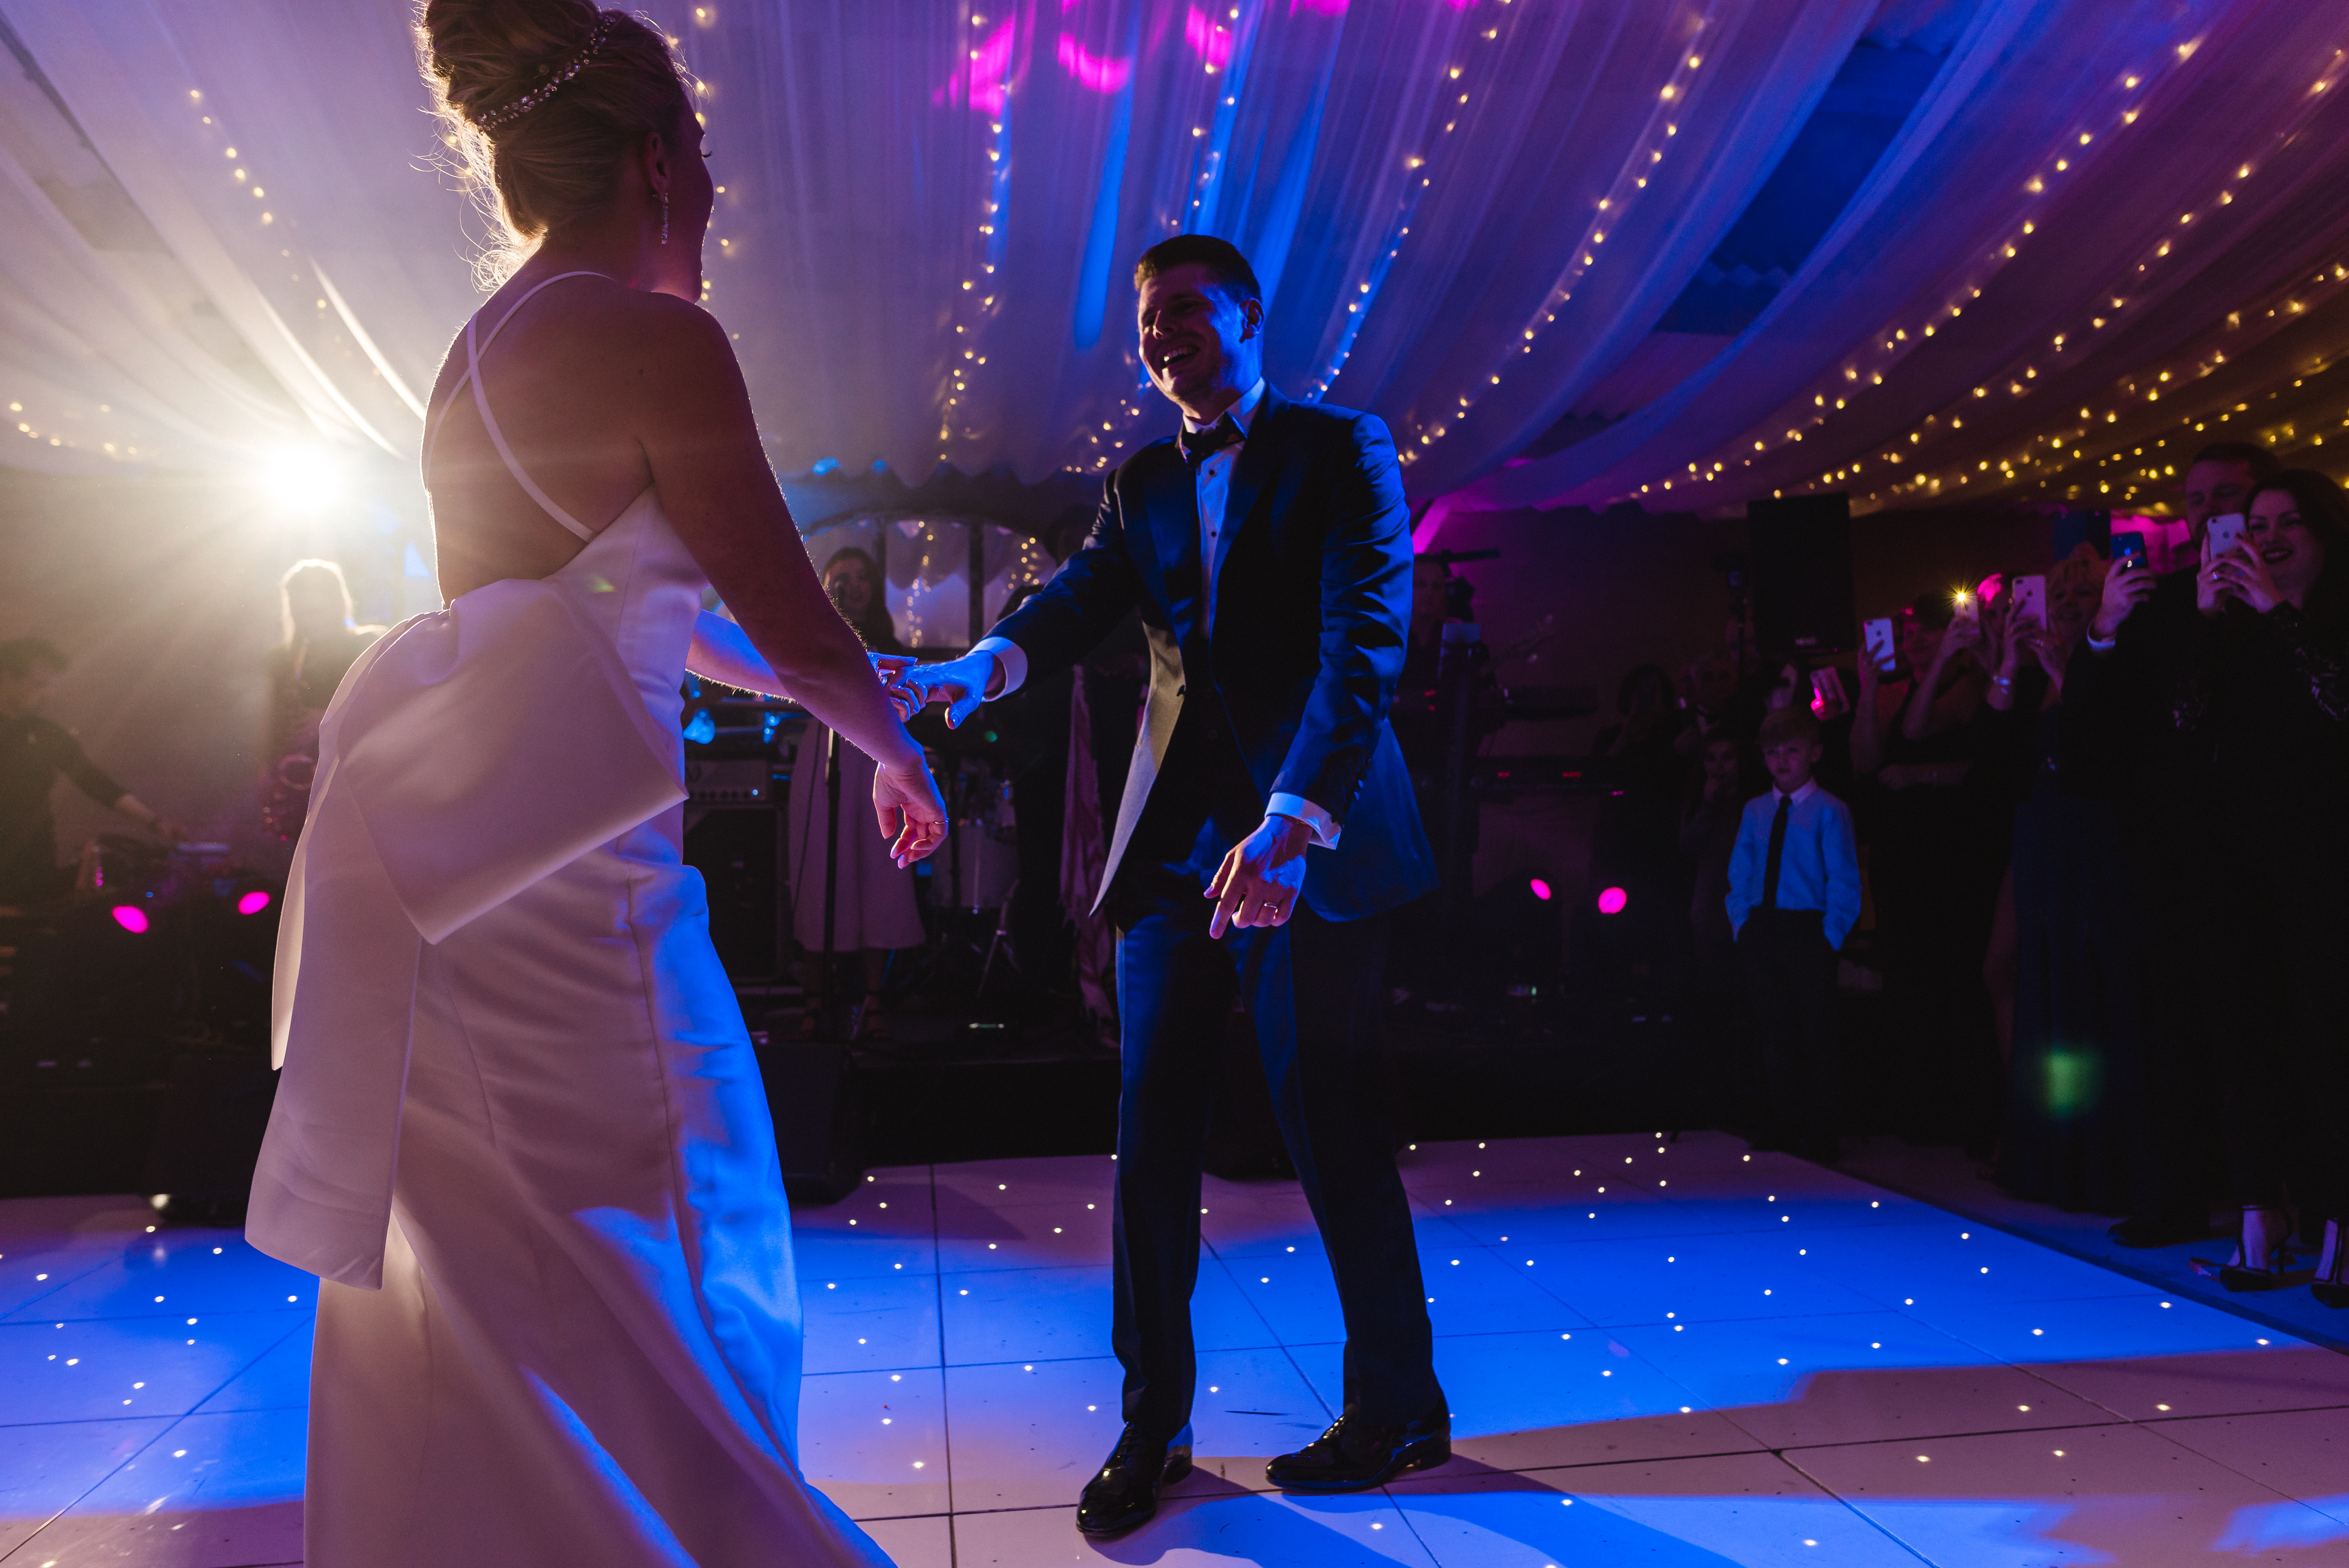 The Top 10 First Dance Songs For 2021 – No.2 Is A Must See!